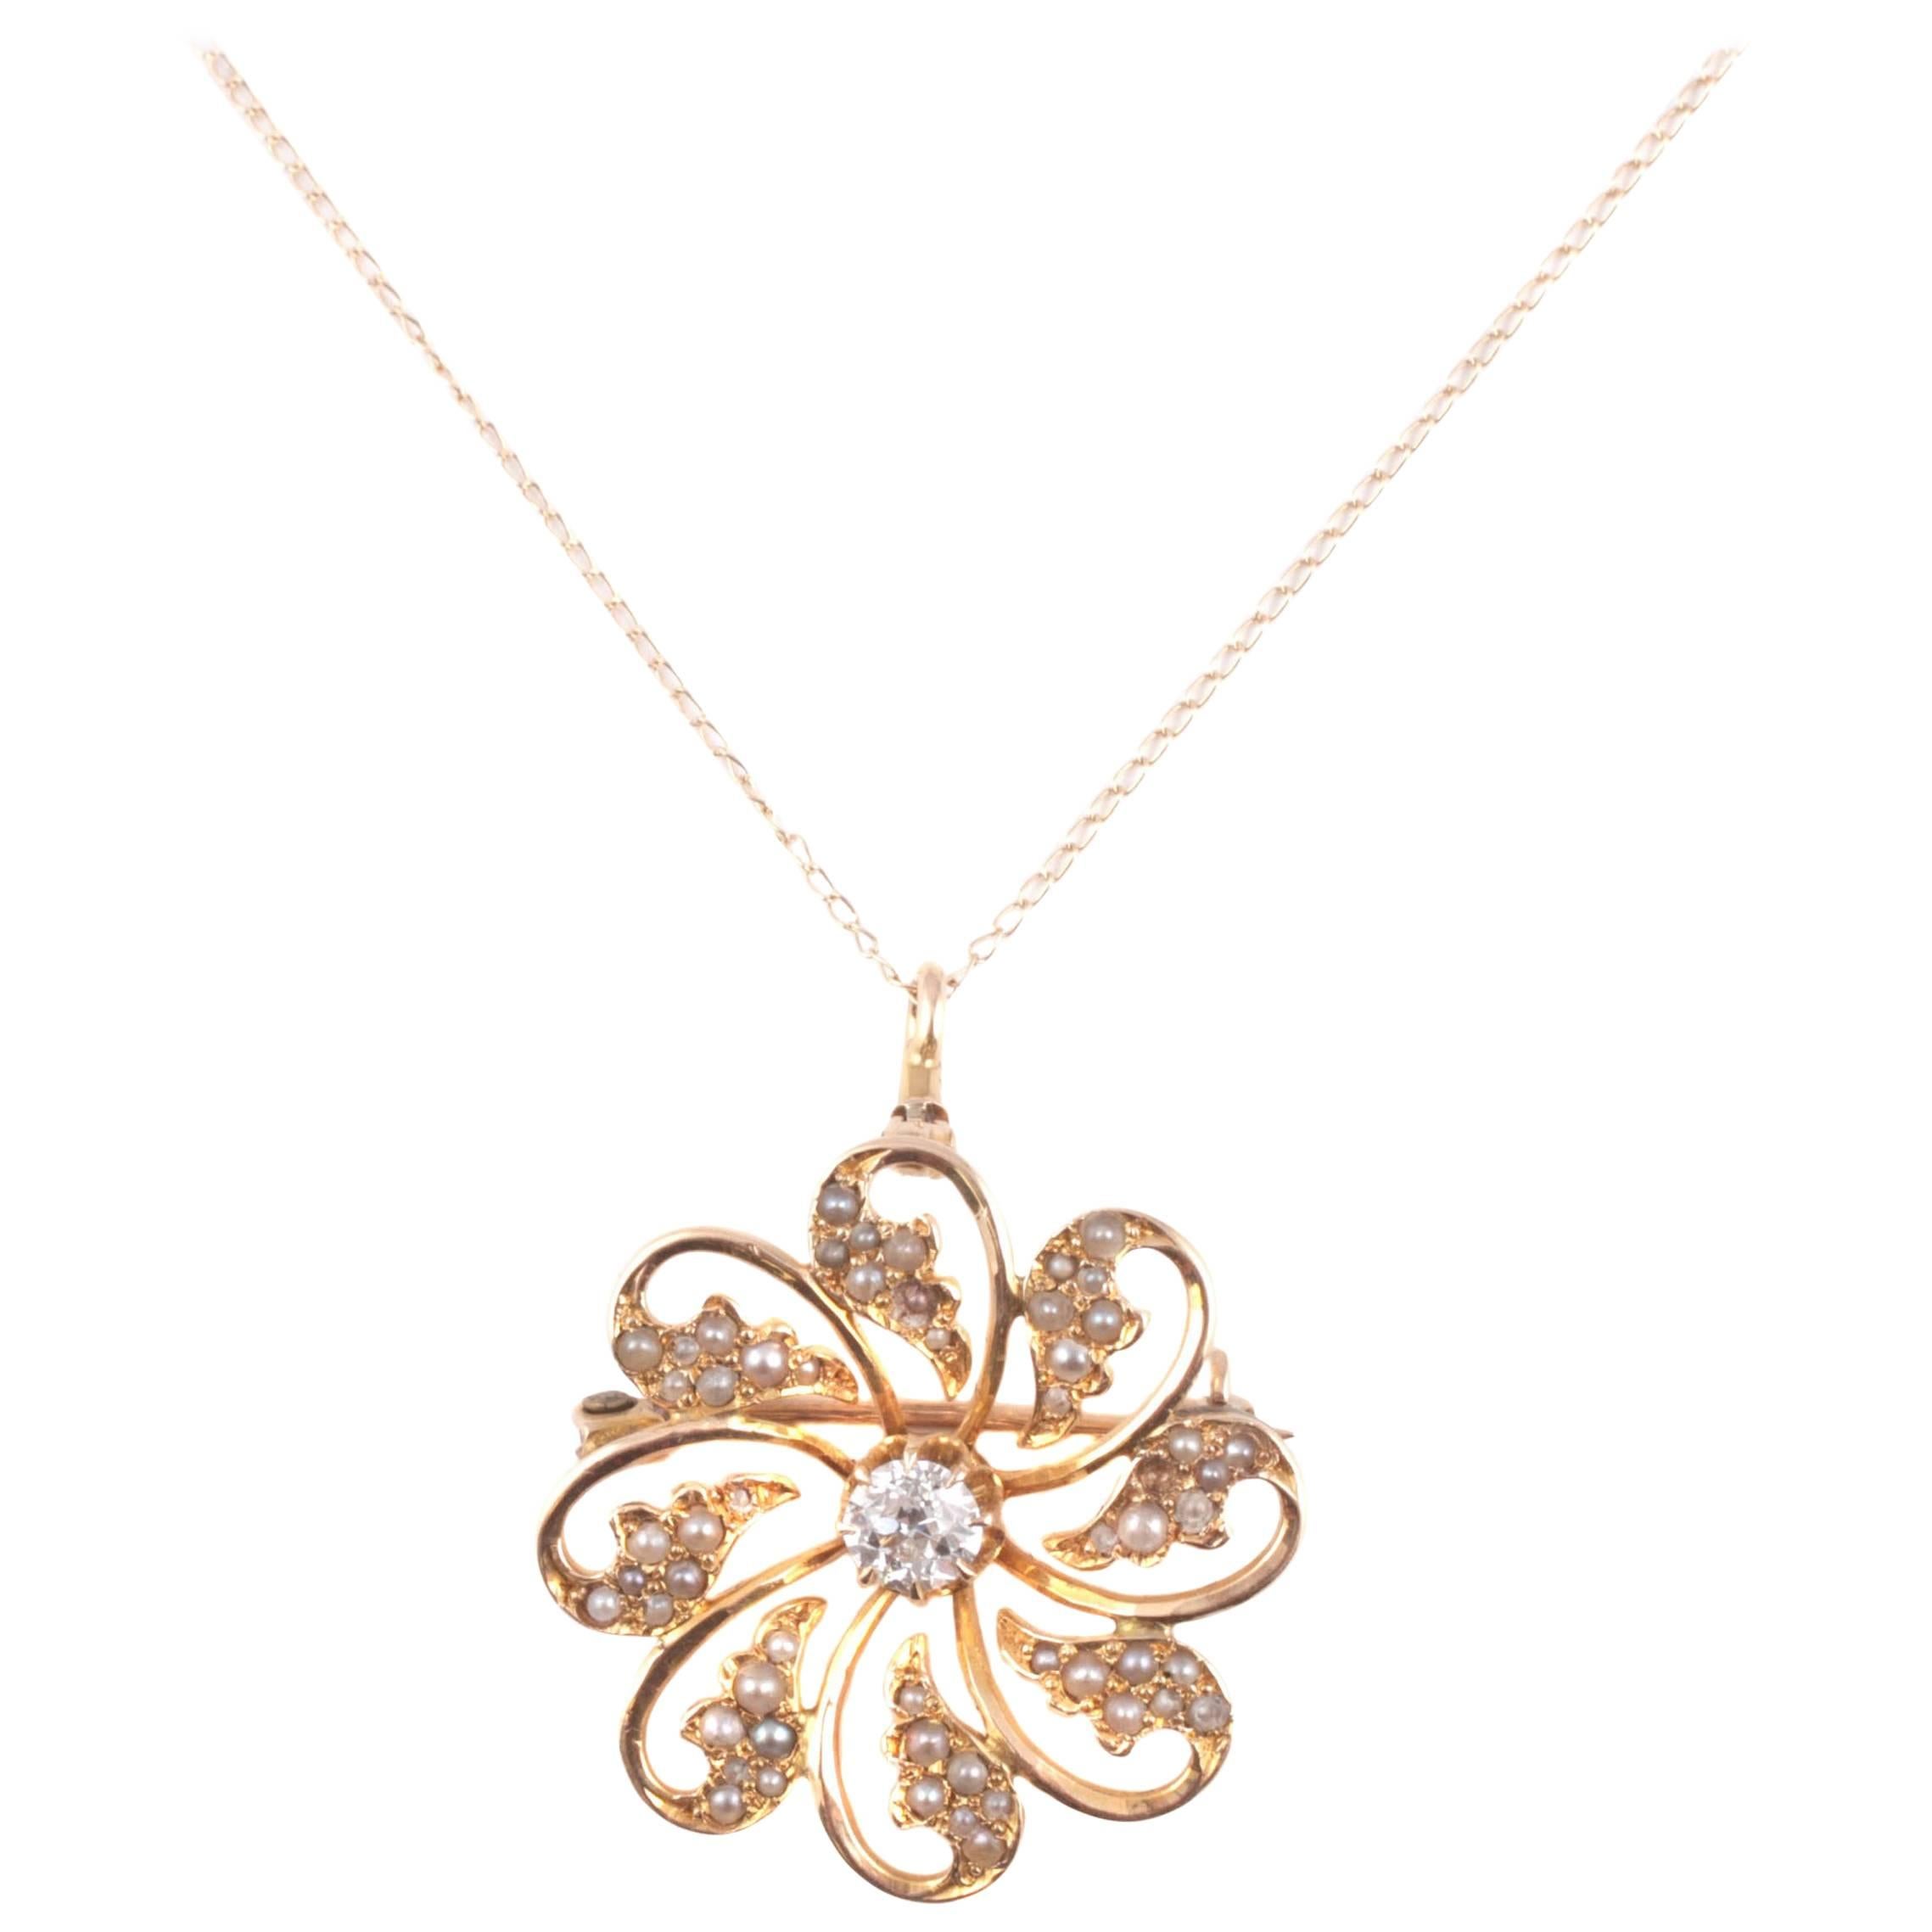 Edwardian .50 Carat Diamond and Seed Pearl Flower Necklace in Yellow Gold